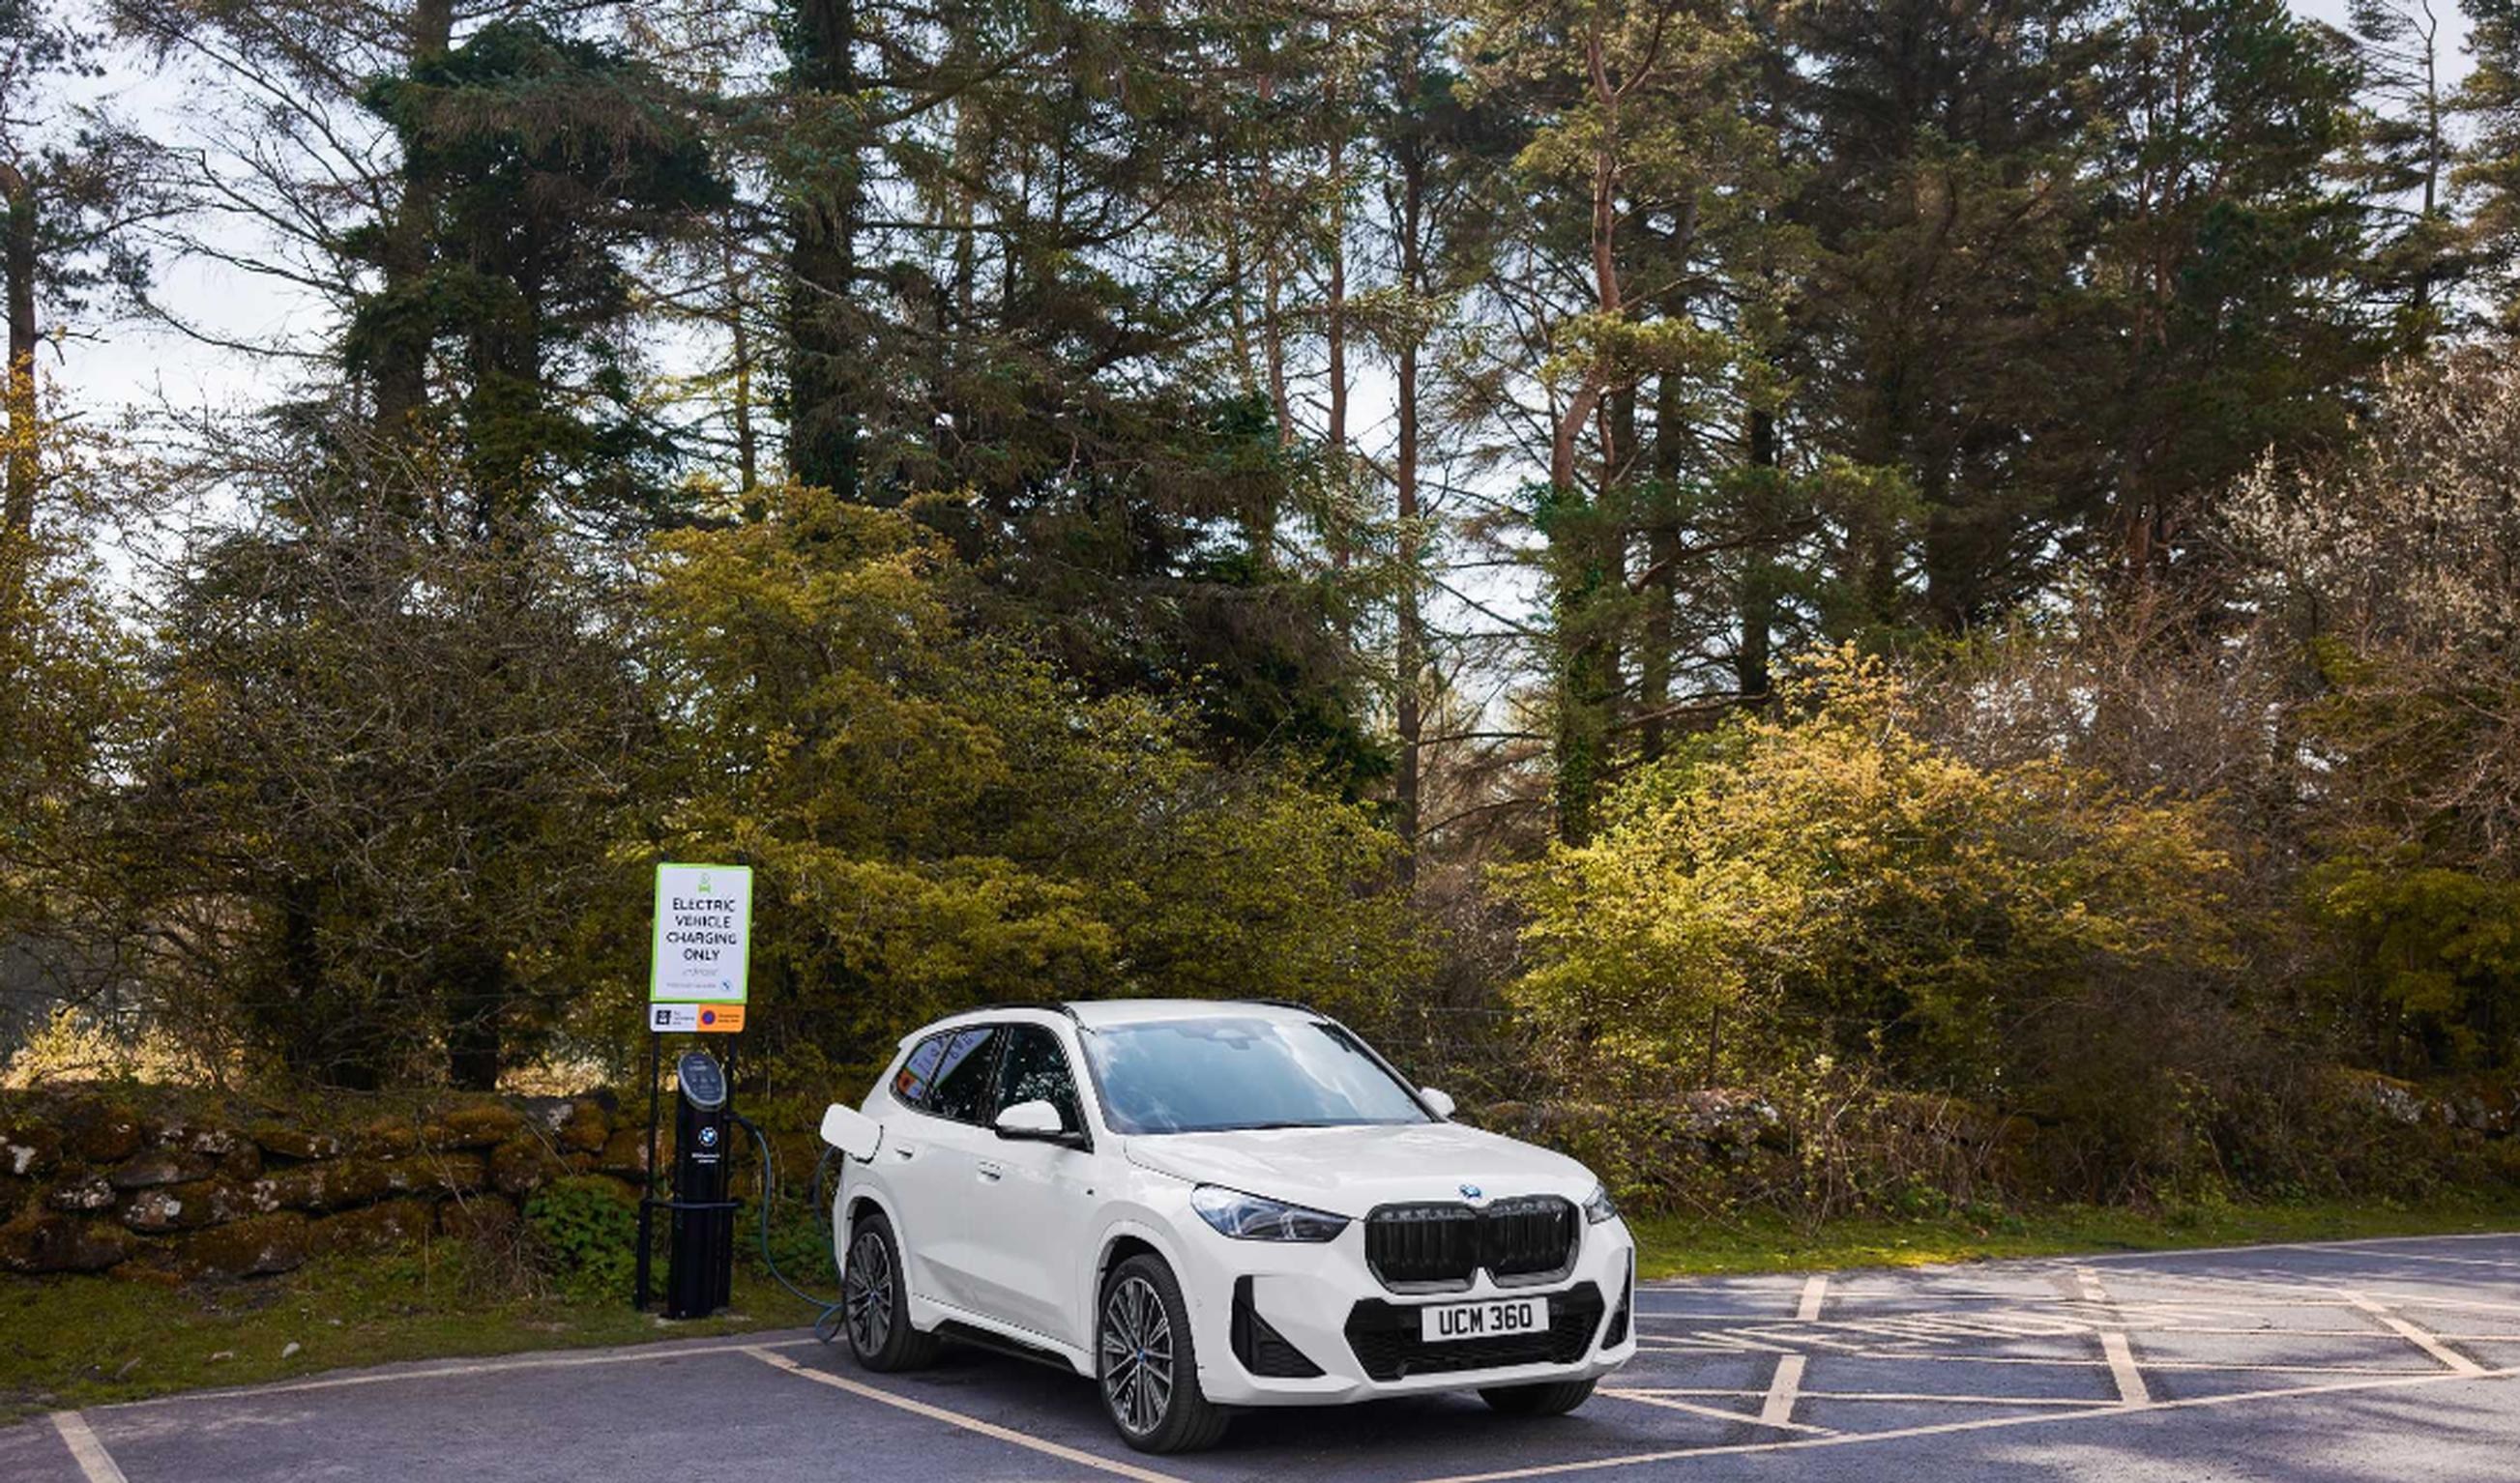 Dartmoor National Park`s new chargers have been funded by BMW UK through its Recharge in Nature partnership with National Parks UK